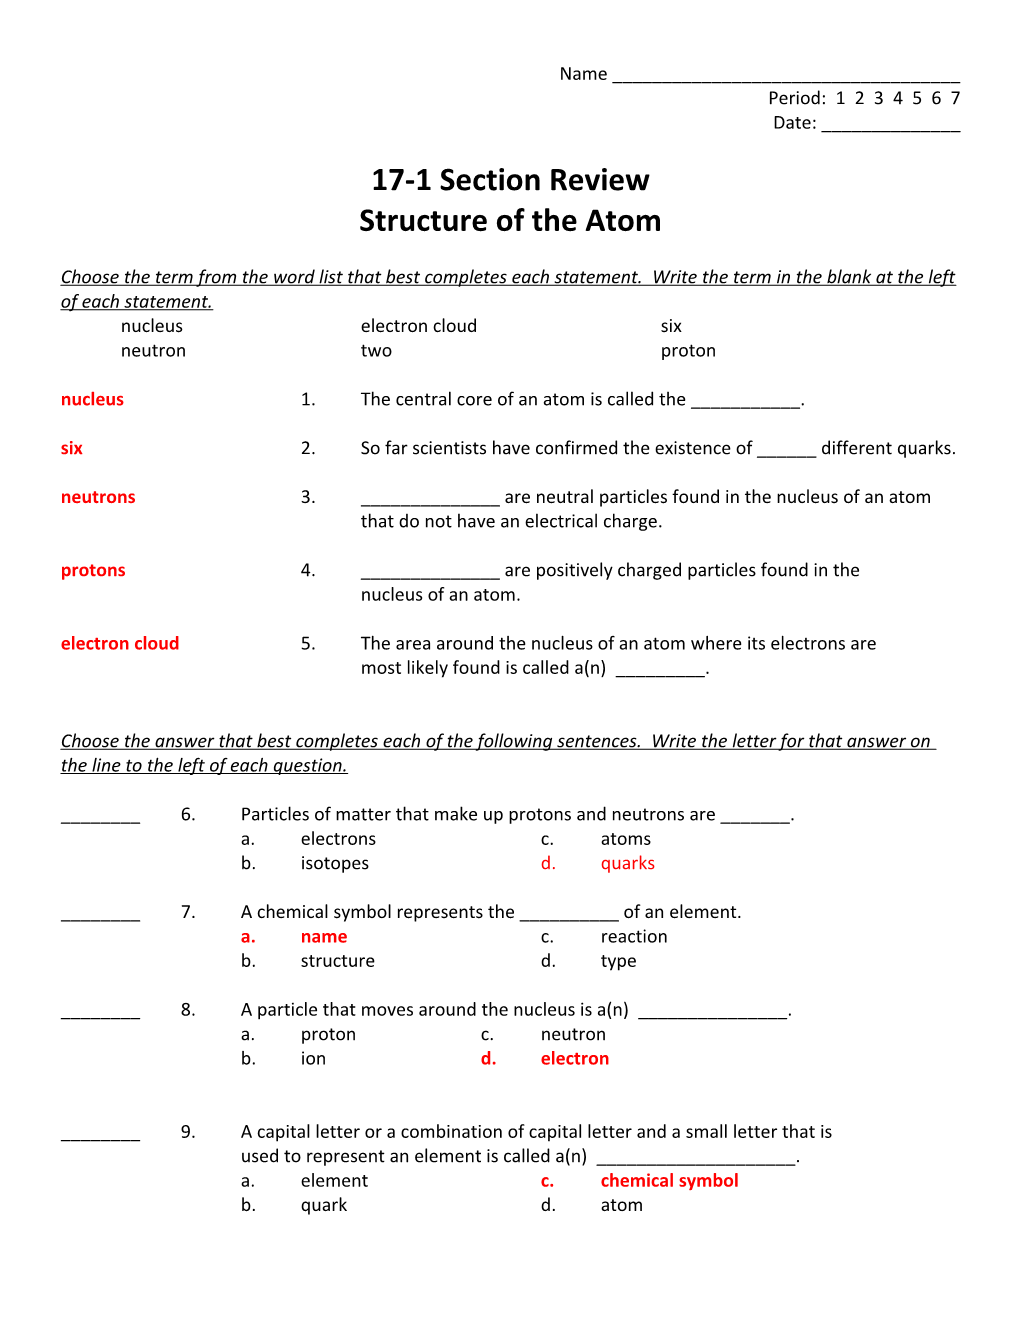 17-1 Section Review